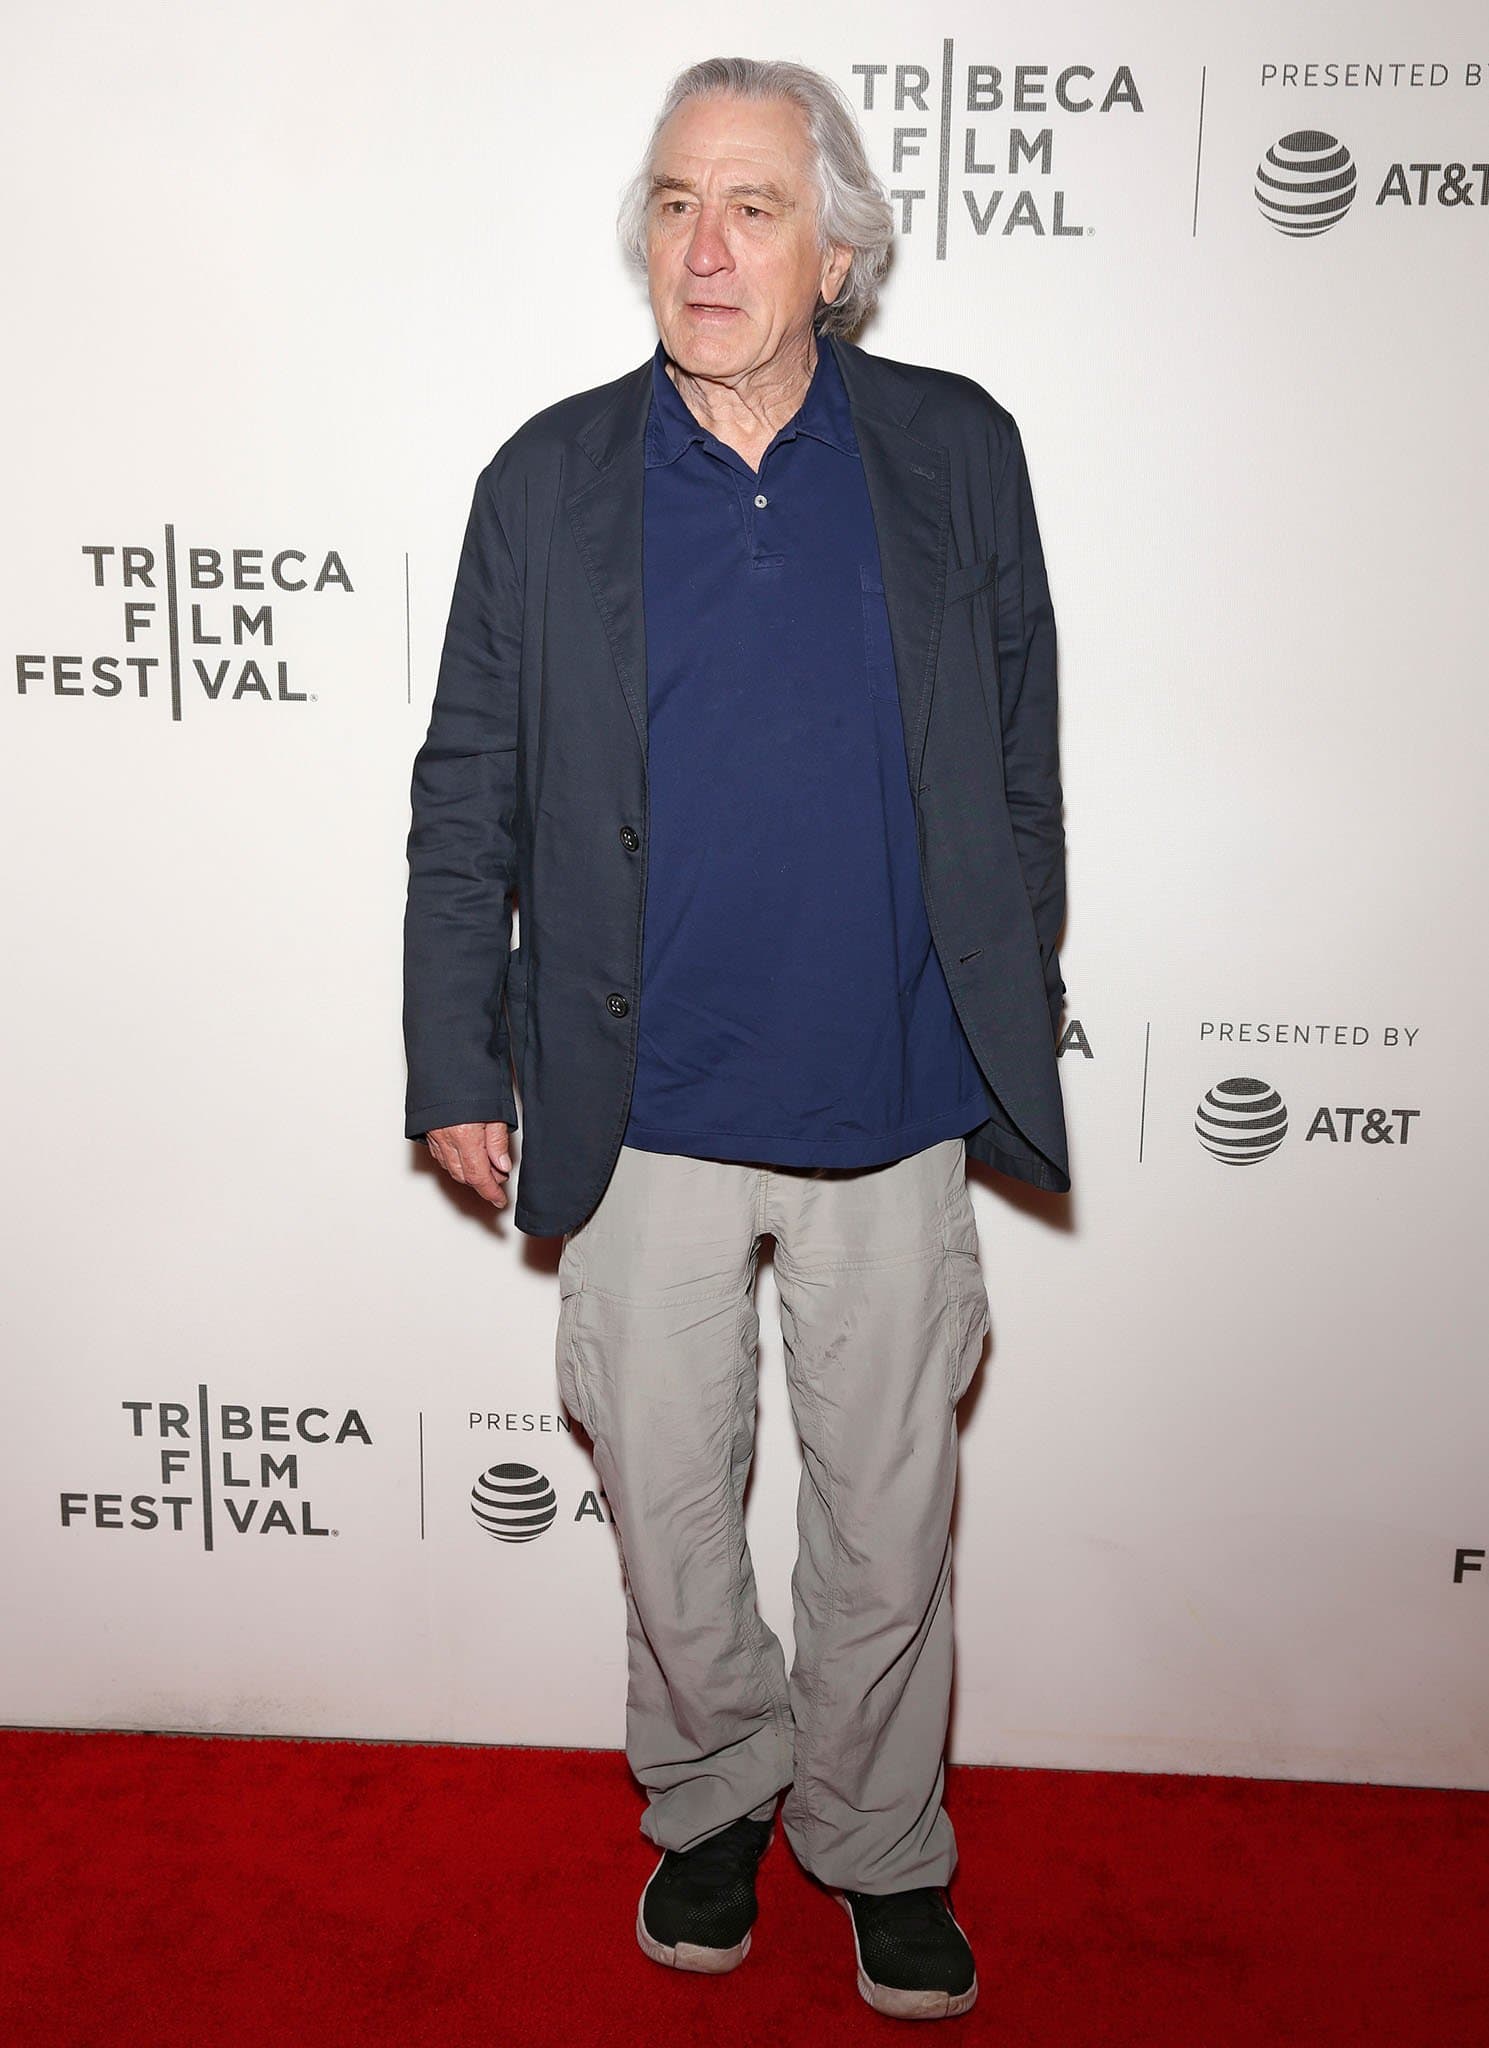 Robert De Niro co-owns the film production company TriBeCa Productions and several boutique hotels and restaurants, including Nobu